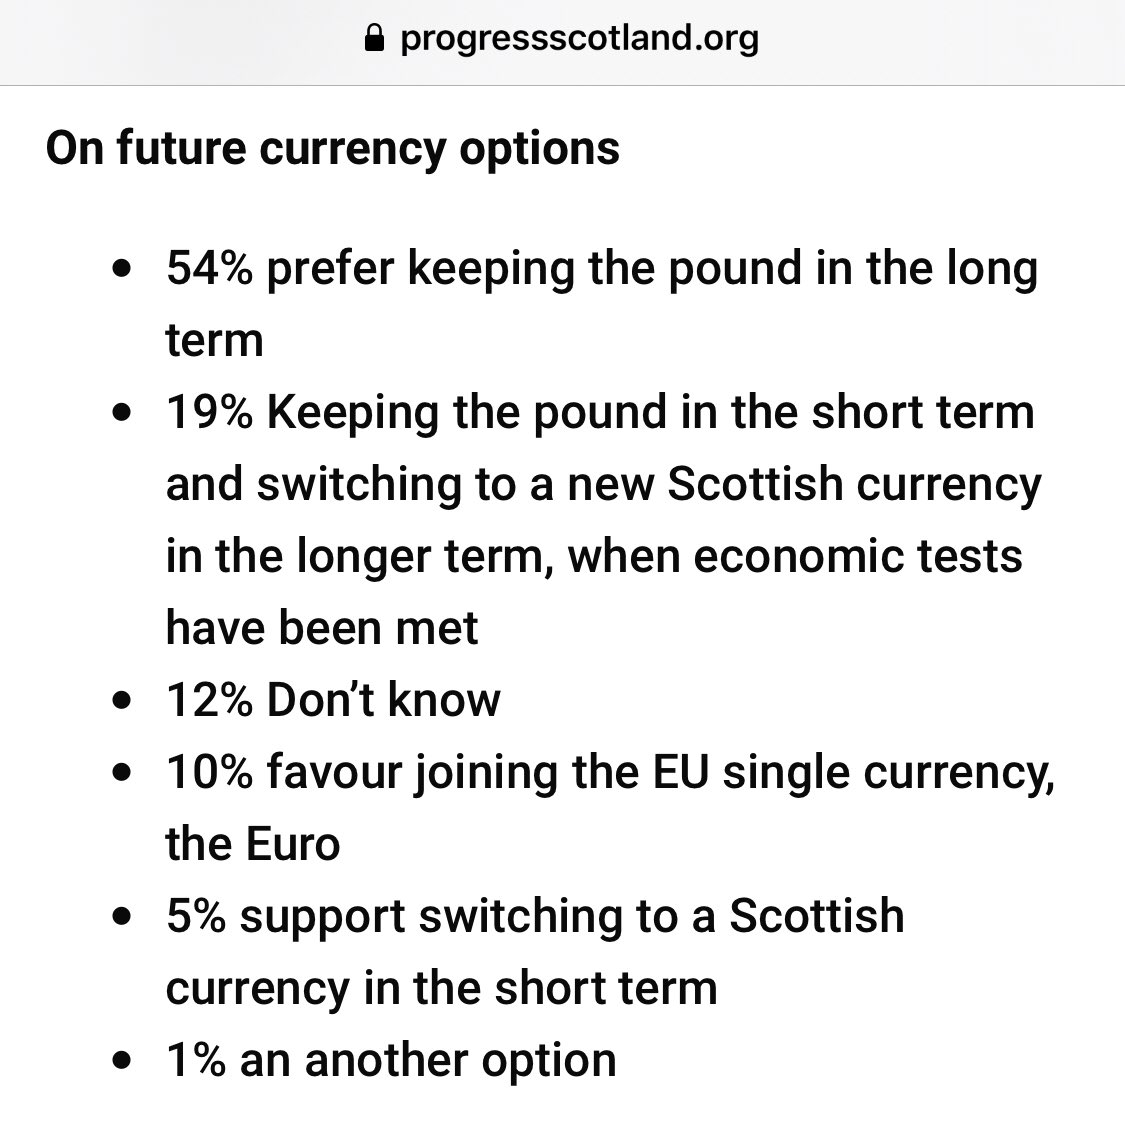 and as this excellent paper explains, the option that has only 5% support is by far and away the most likely short-term outcome https://www.these-islands.co.uk/publications/i330/choose_your_poison_the_snps_currency_headache.aspx(3/n)